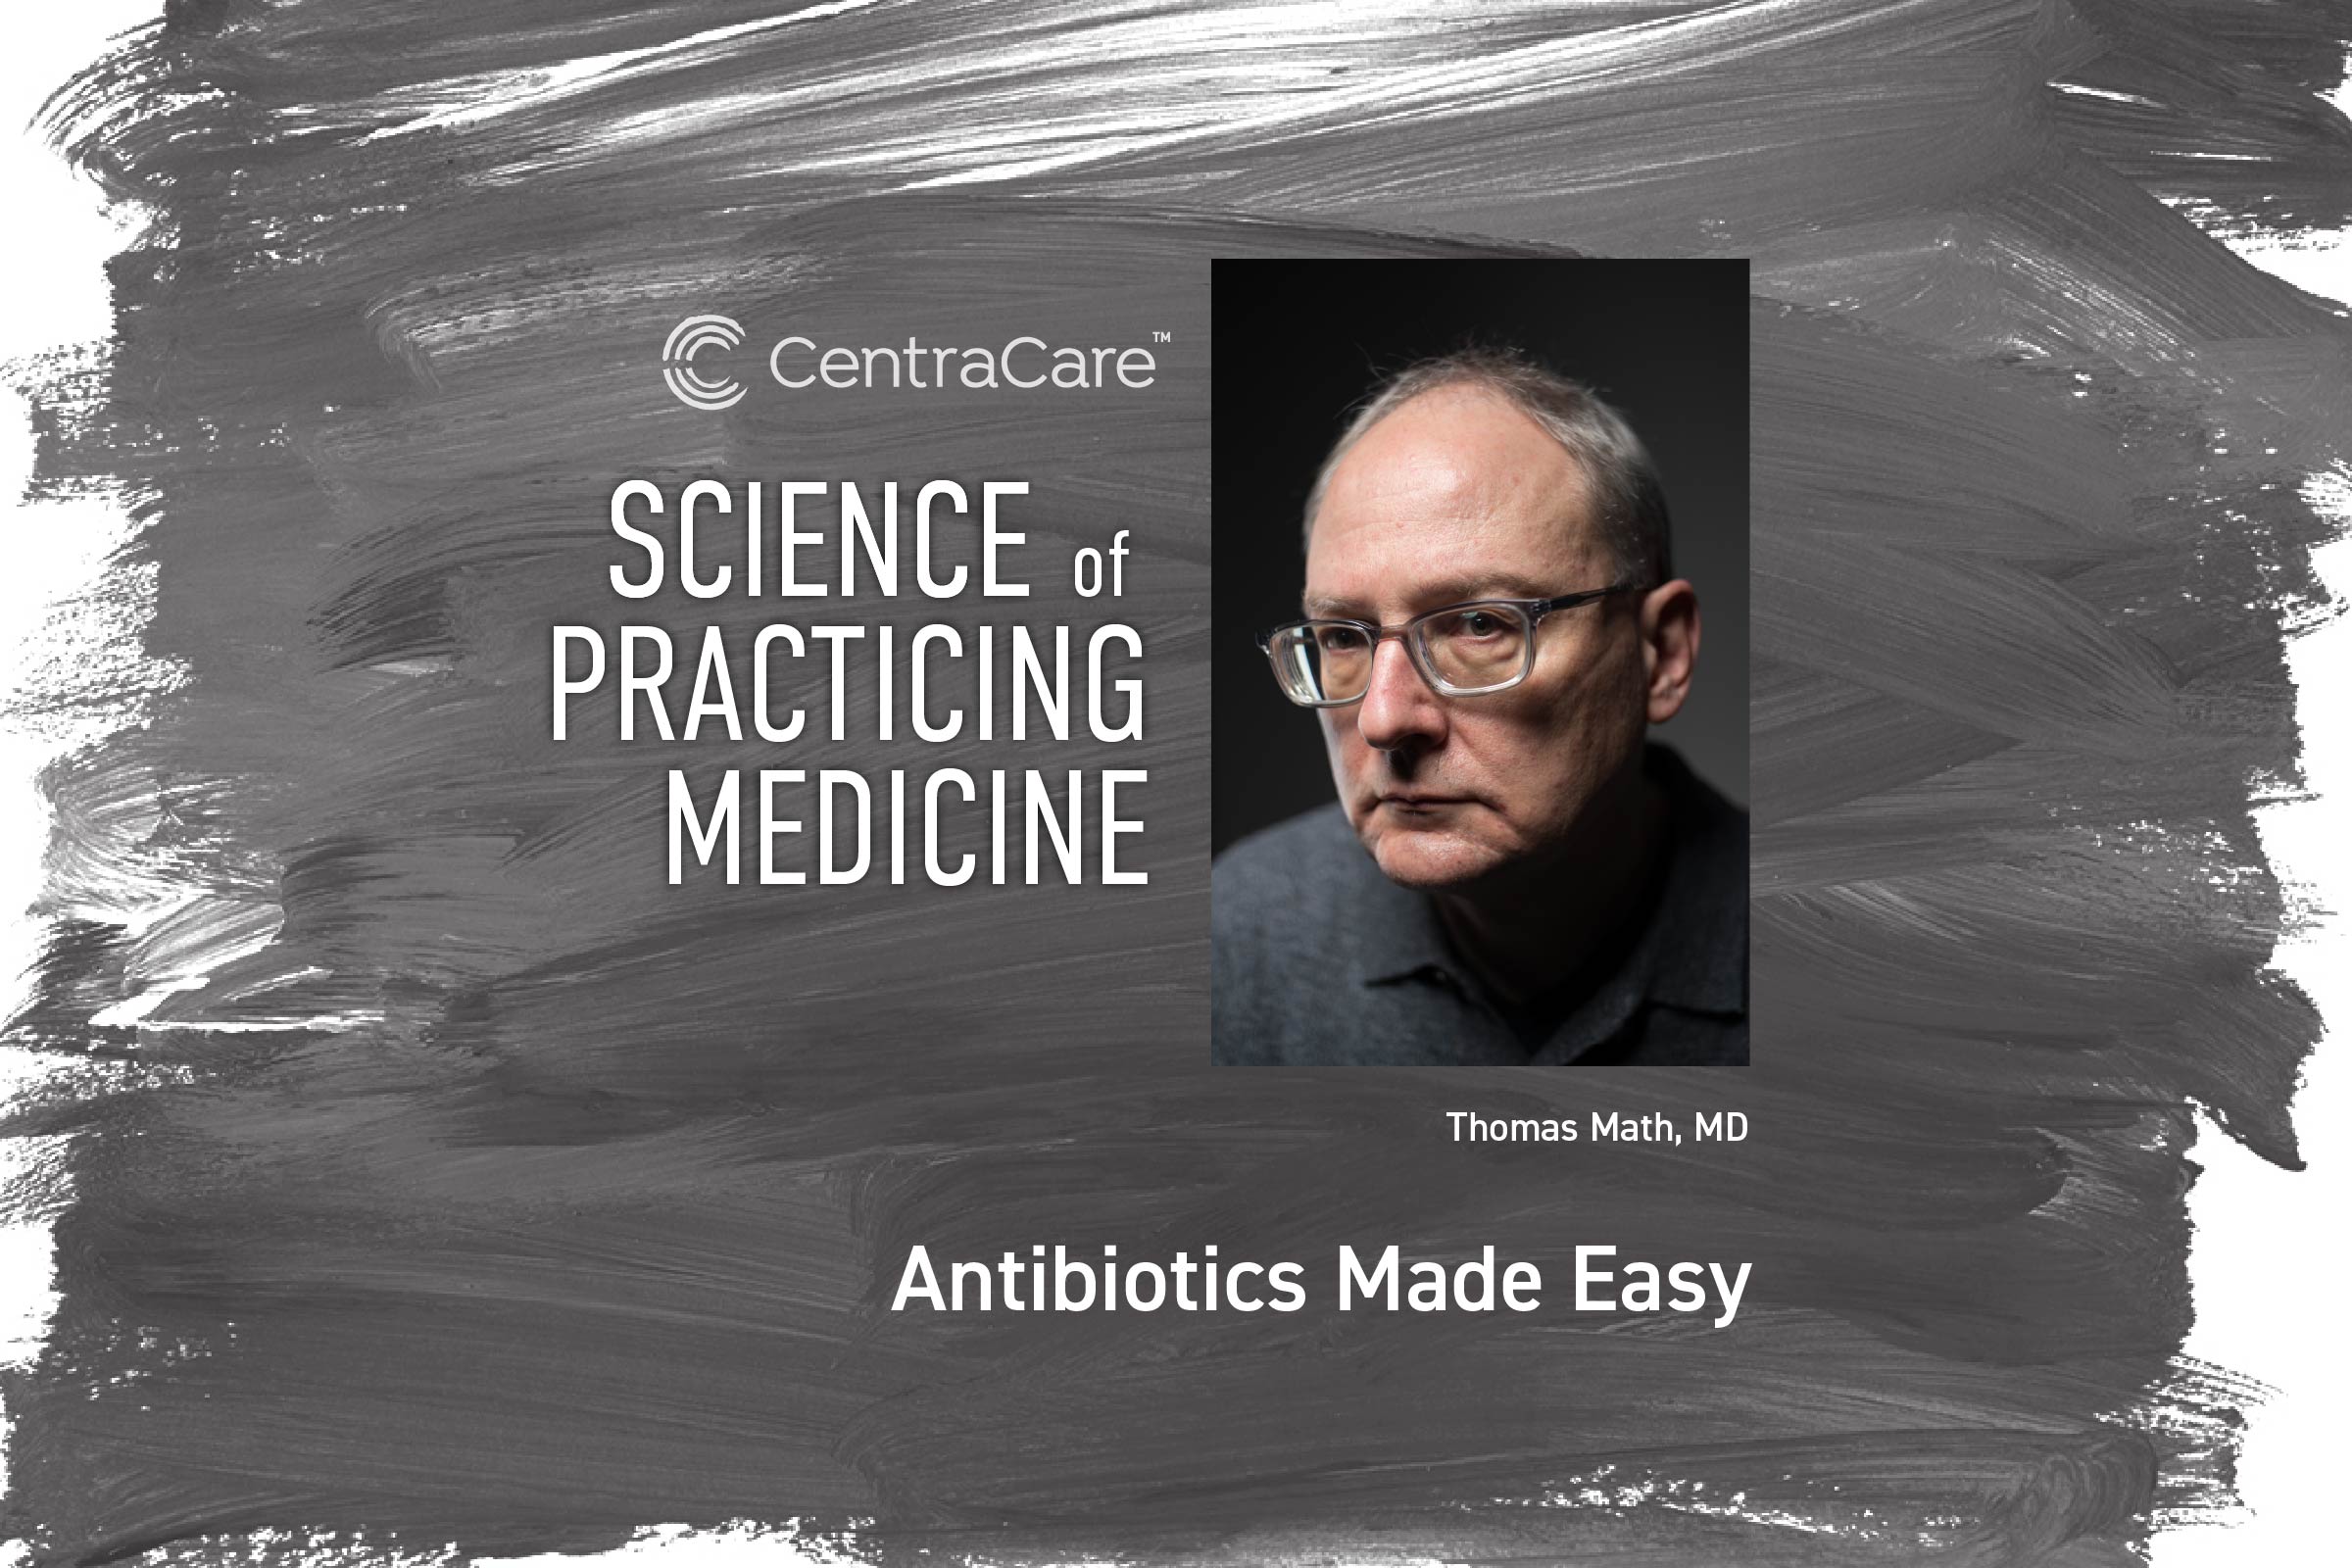 Digital postcard featuring the Science of Practicing Medicine with Dr. Thomas Math on the topic of Antibiotics